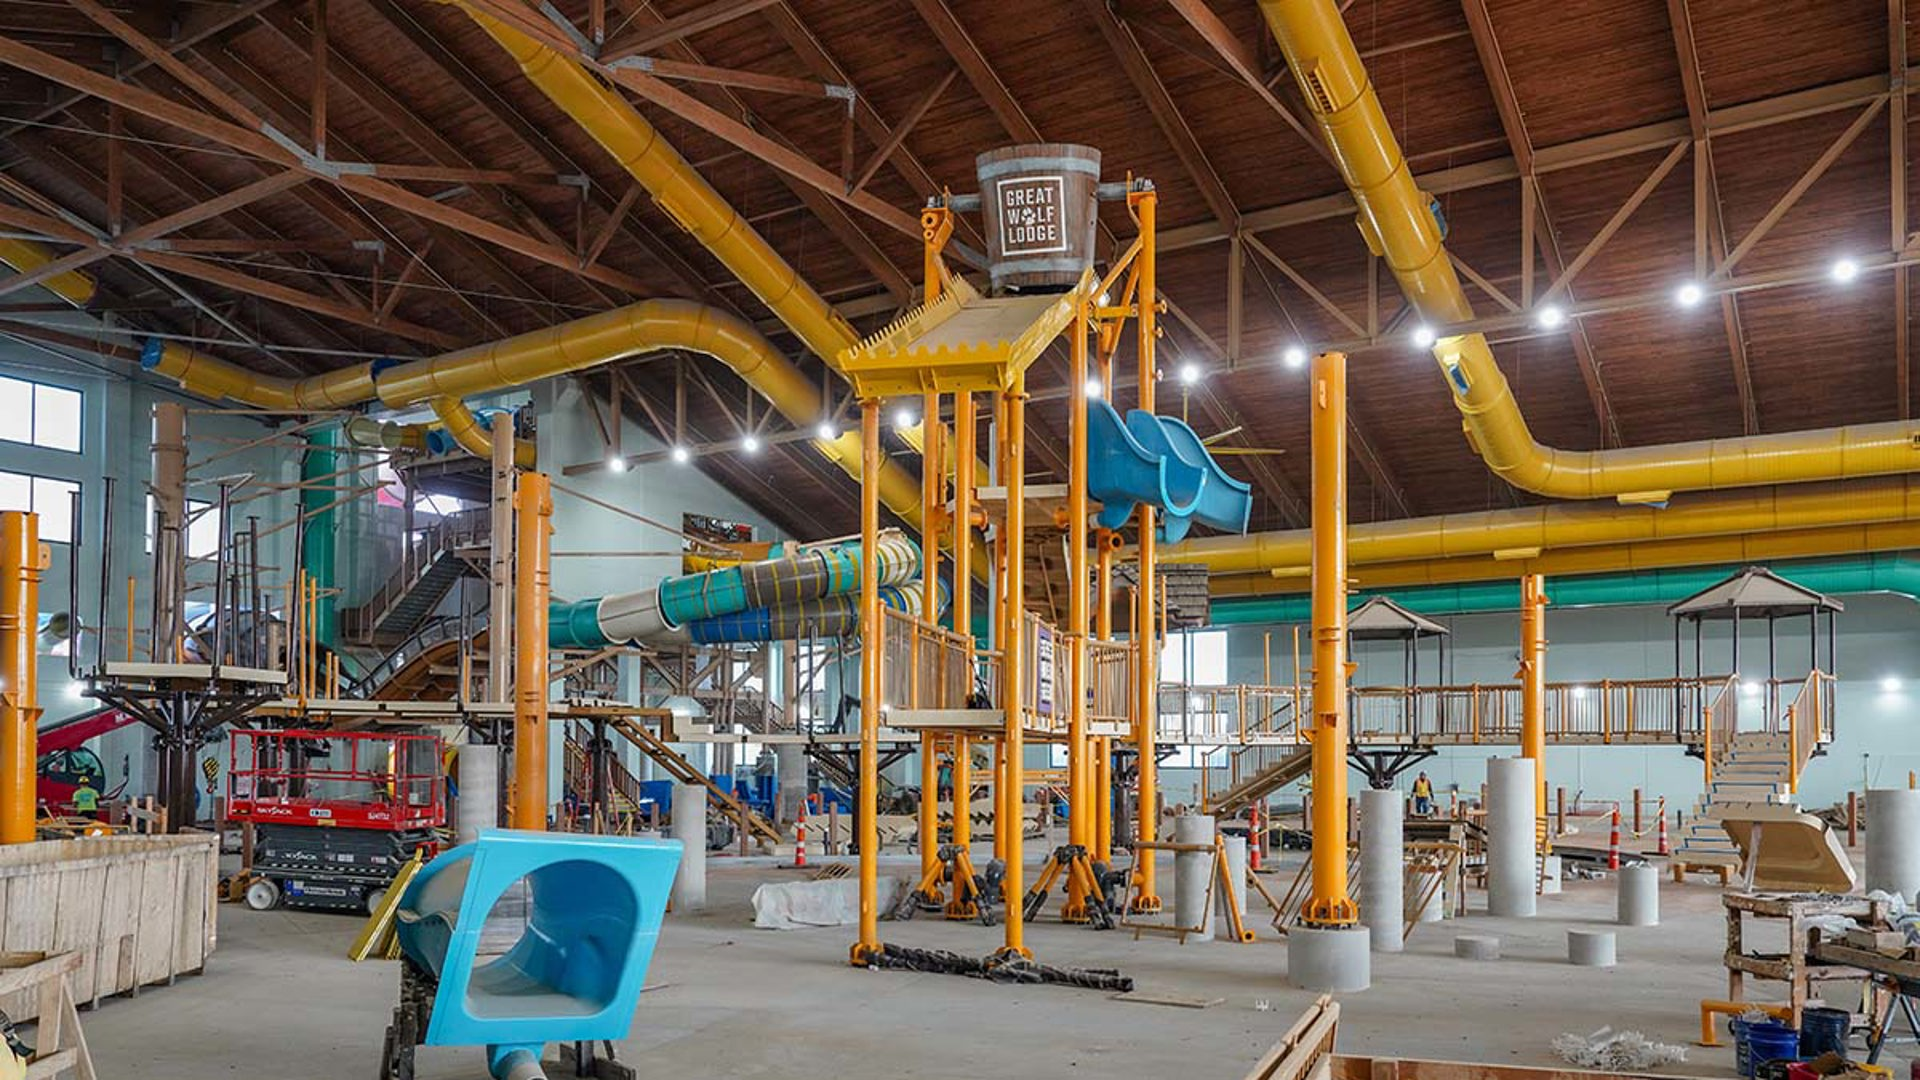 We got a sneak peek of the Great Wolf Lodge, a 92,000-square-foot indoor water park and resort now under construction in Webster, south of Houston.